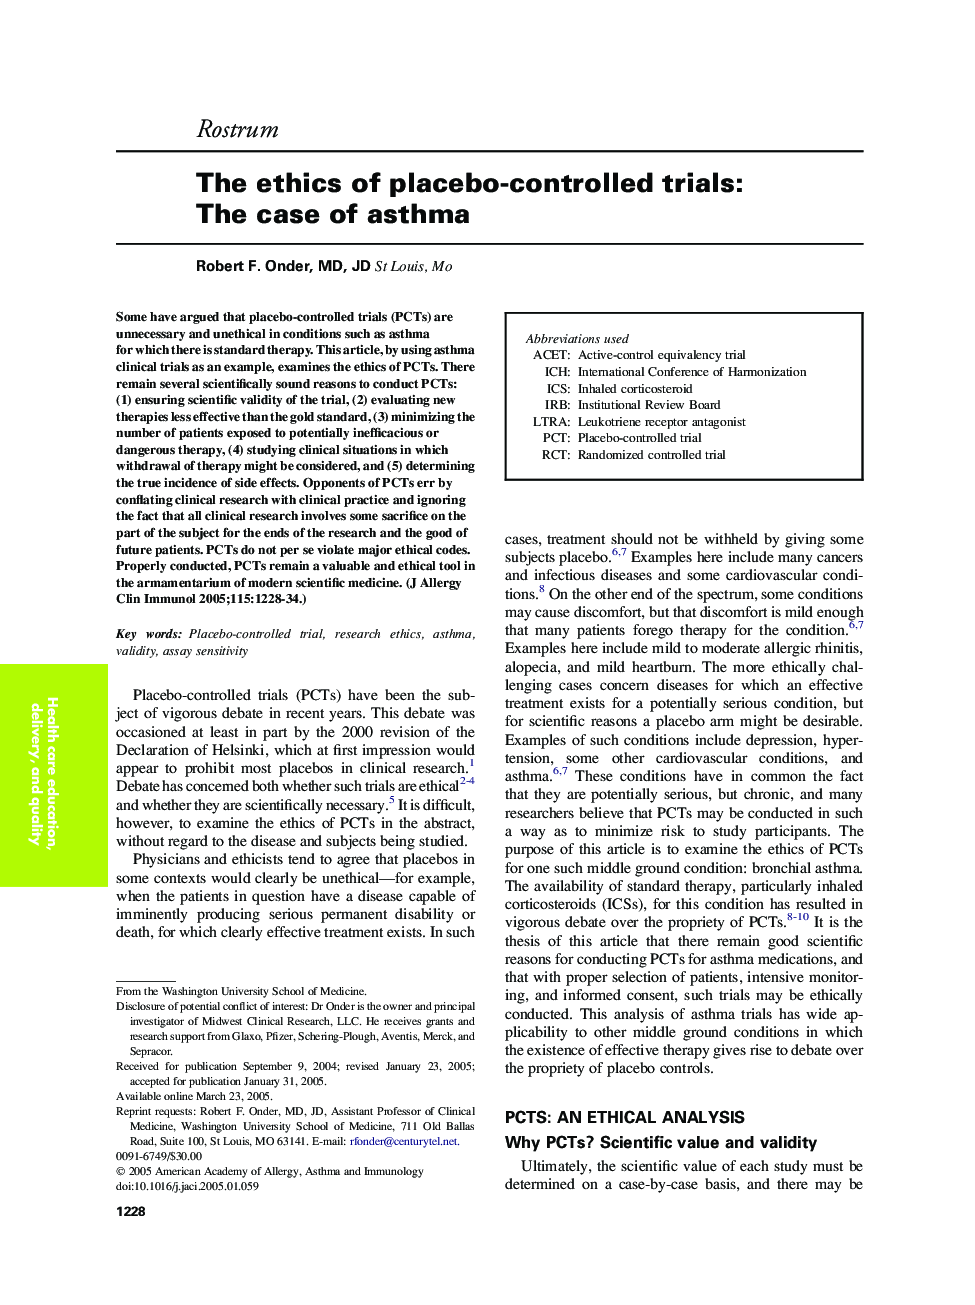 The ethics of placebo-controlled trials: The case of asthma